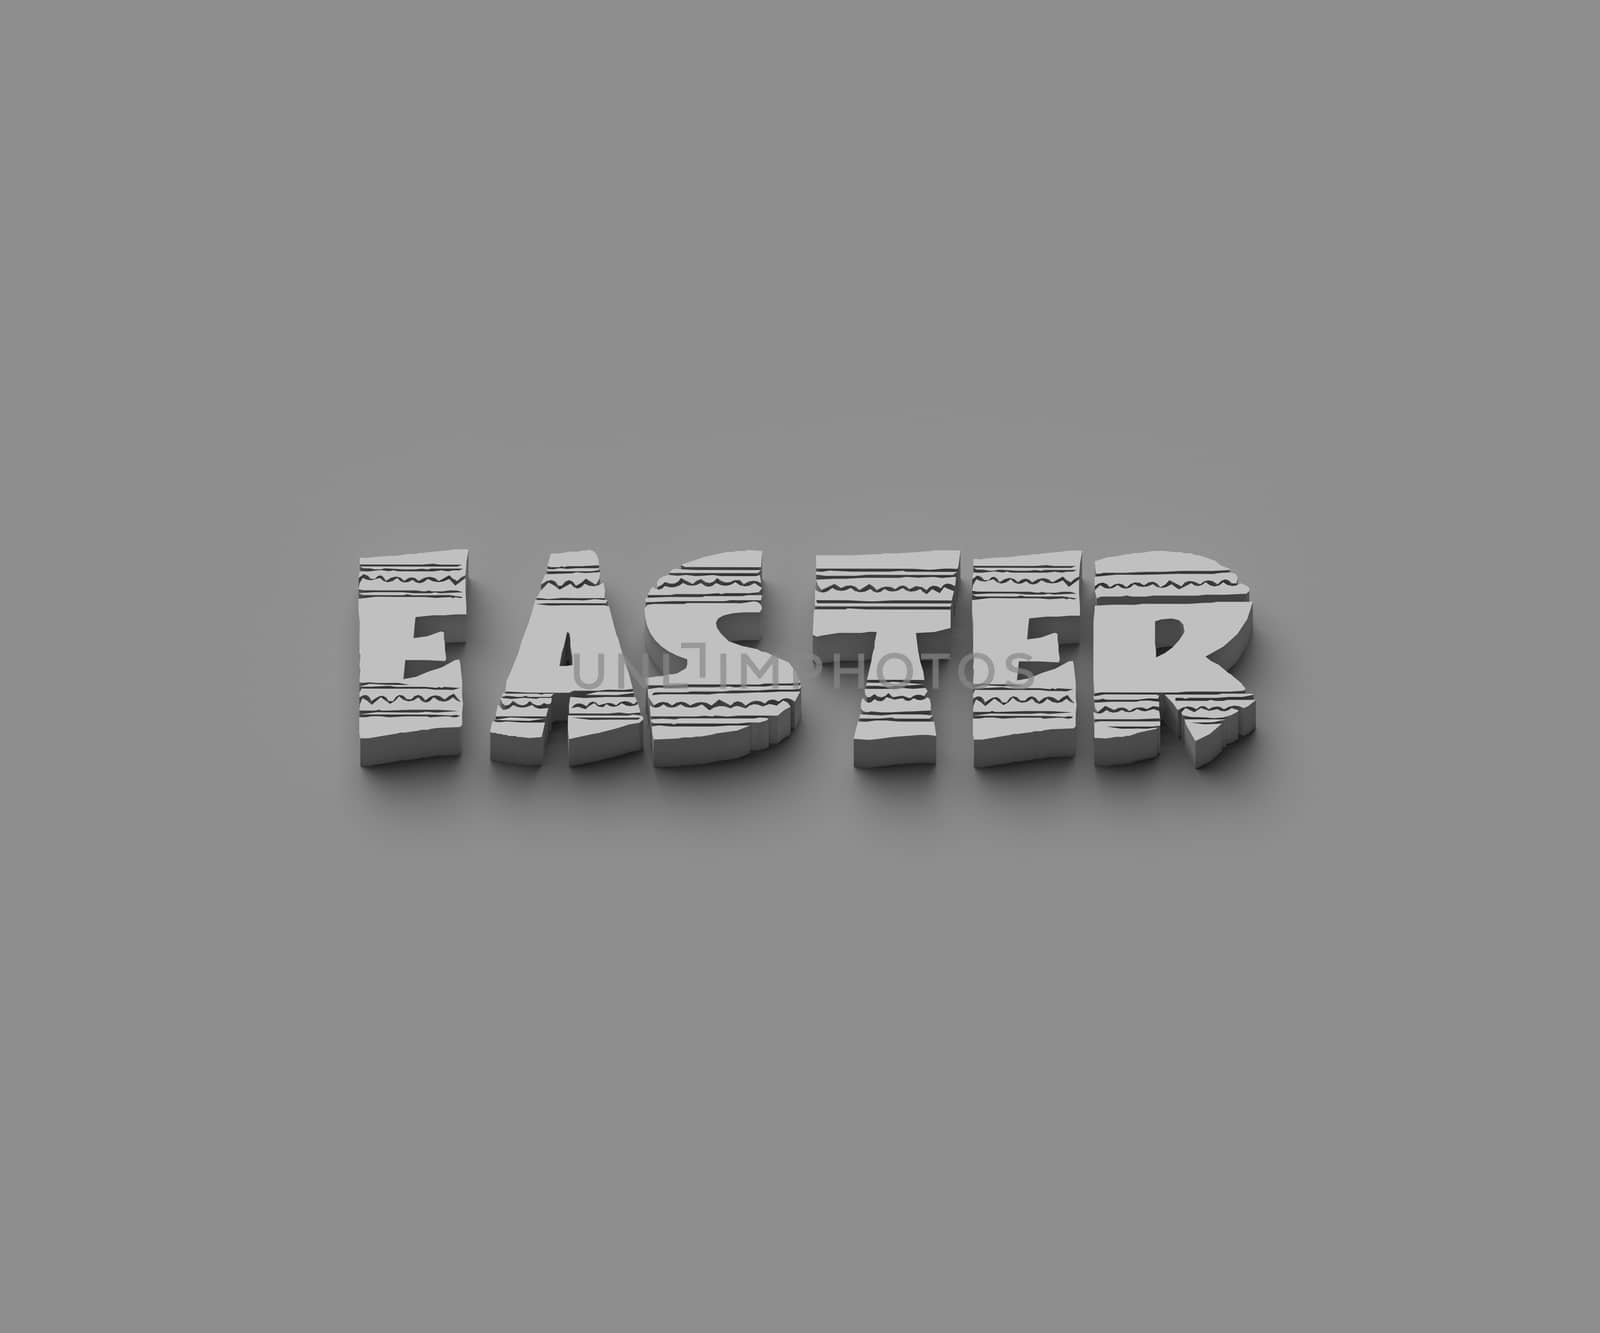 3D WORDS OF 'EASTER' ON PLAIN BACKGROUND by PrettyTG